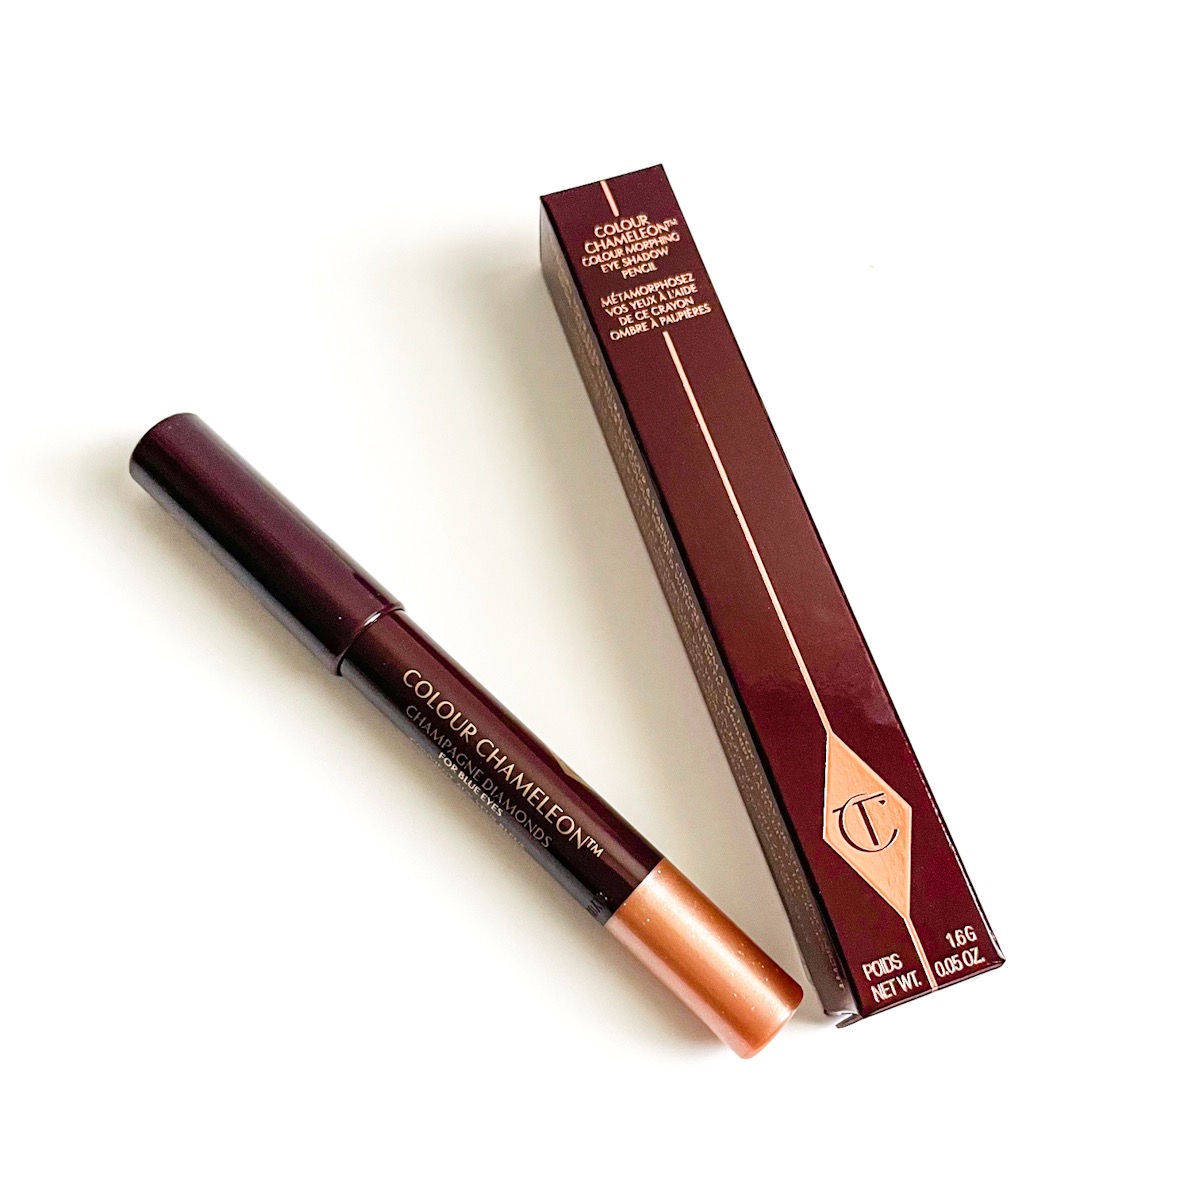 maroon and gold box next to maroon and gold eyeshadow pencil, closed